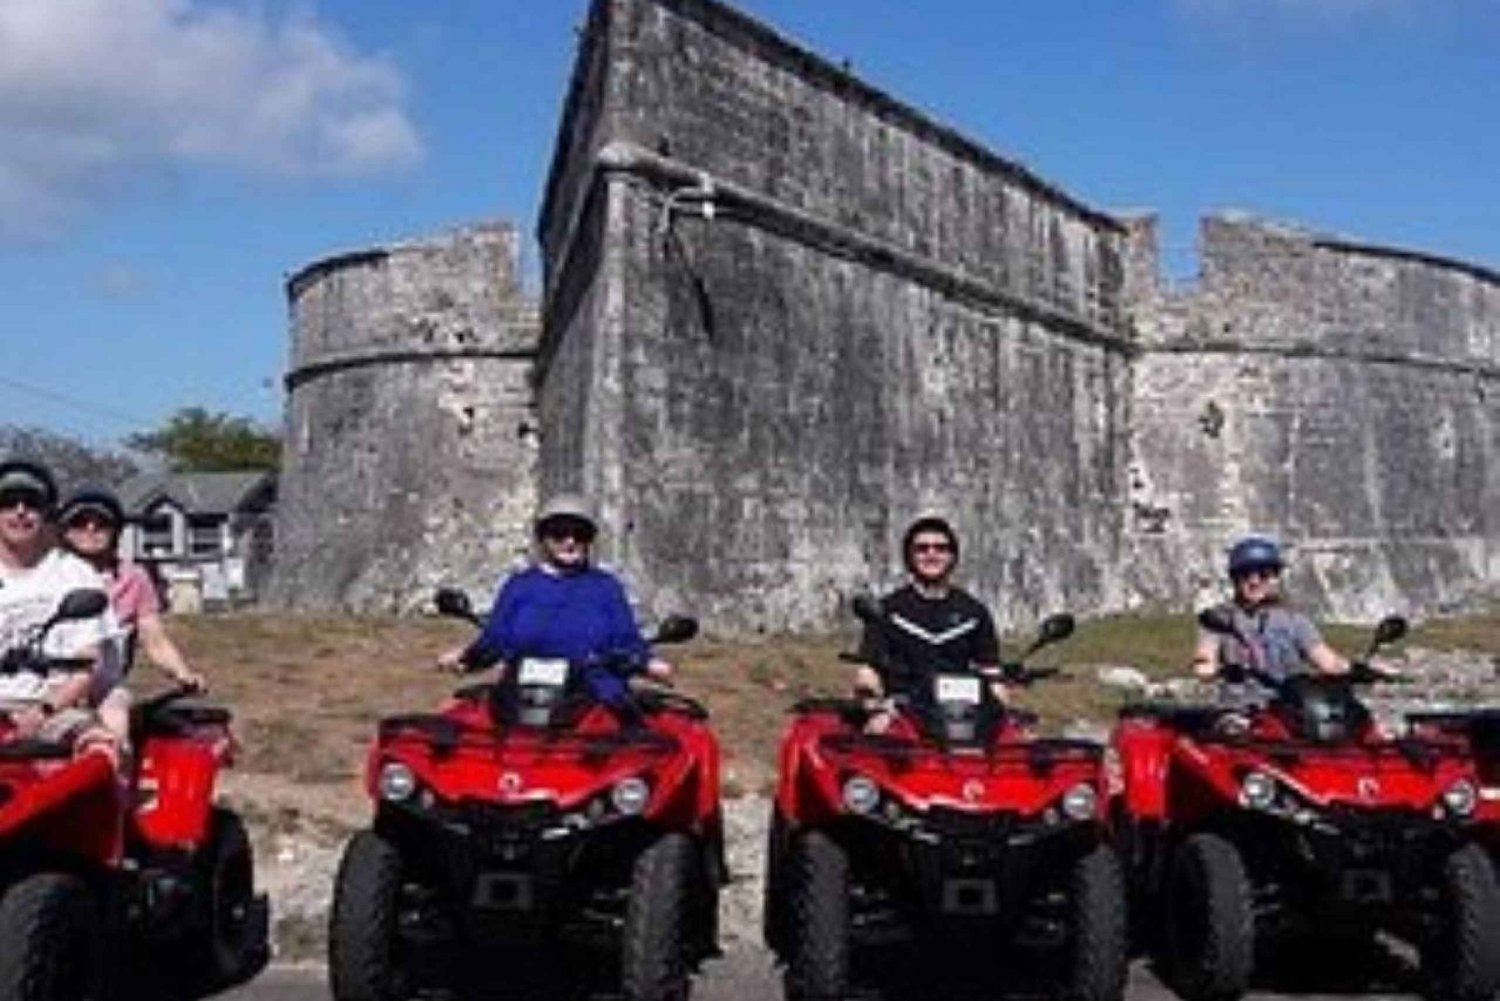 Nas: Atv guided tours best beaches and historical stops!